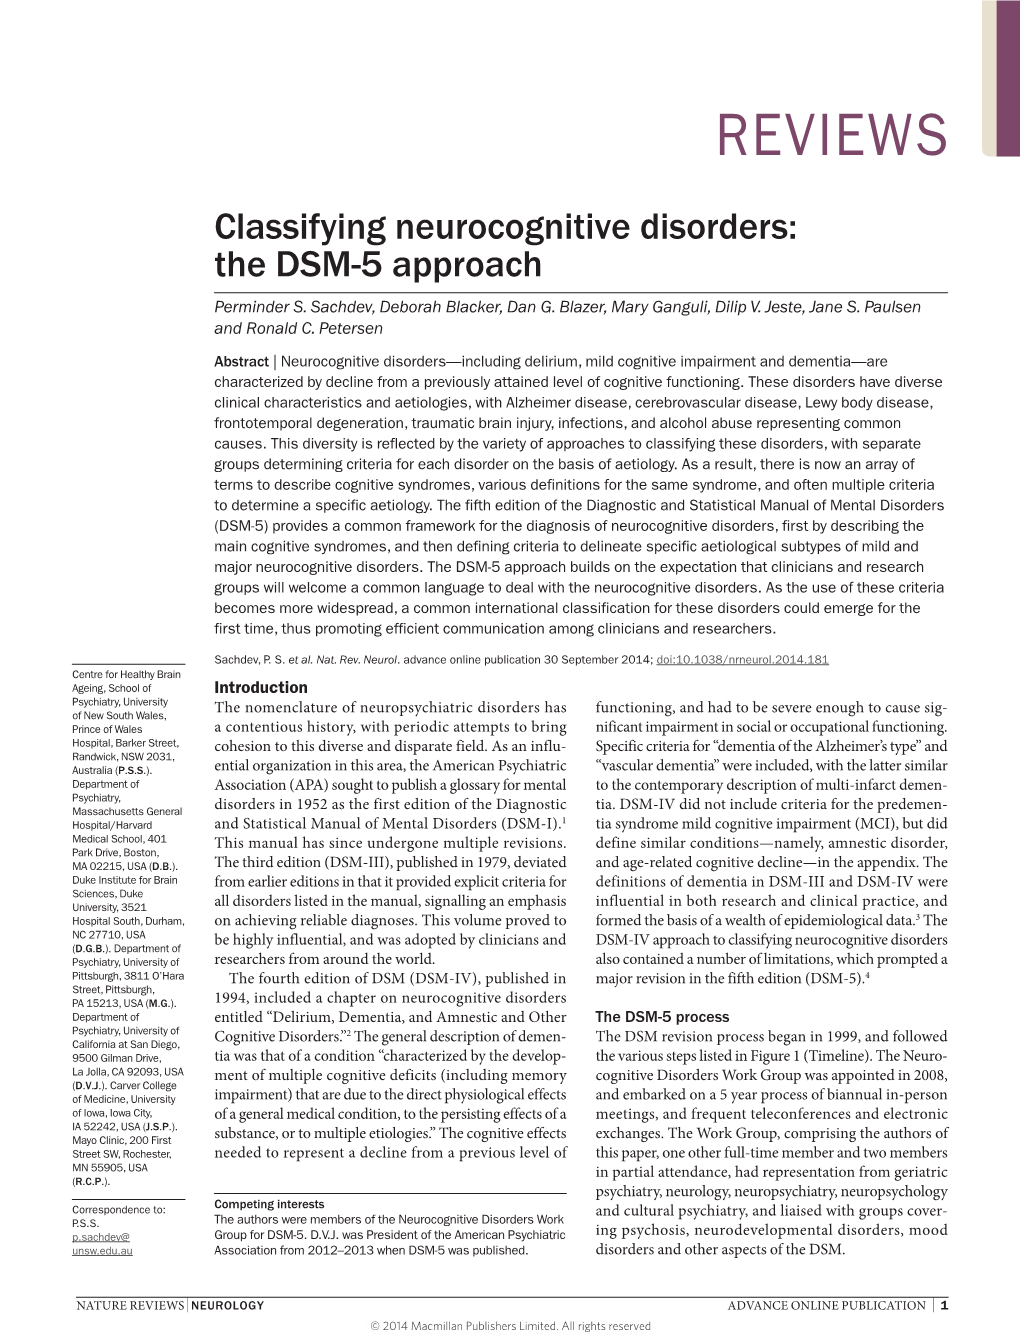 Classifying Neurocognitive Disorders: the DSM-5 Approach